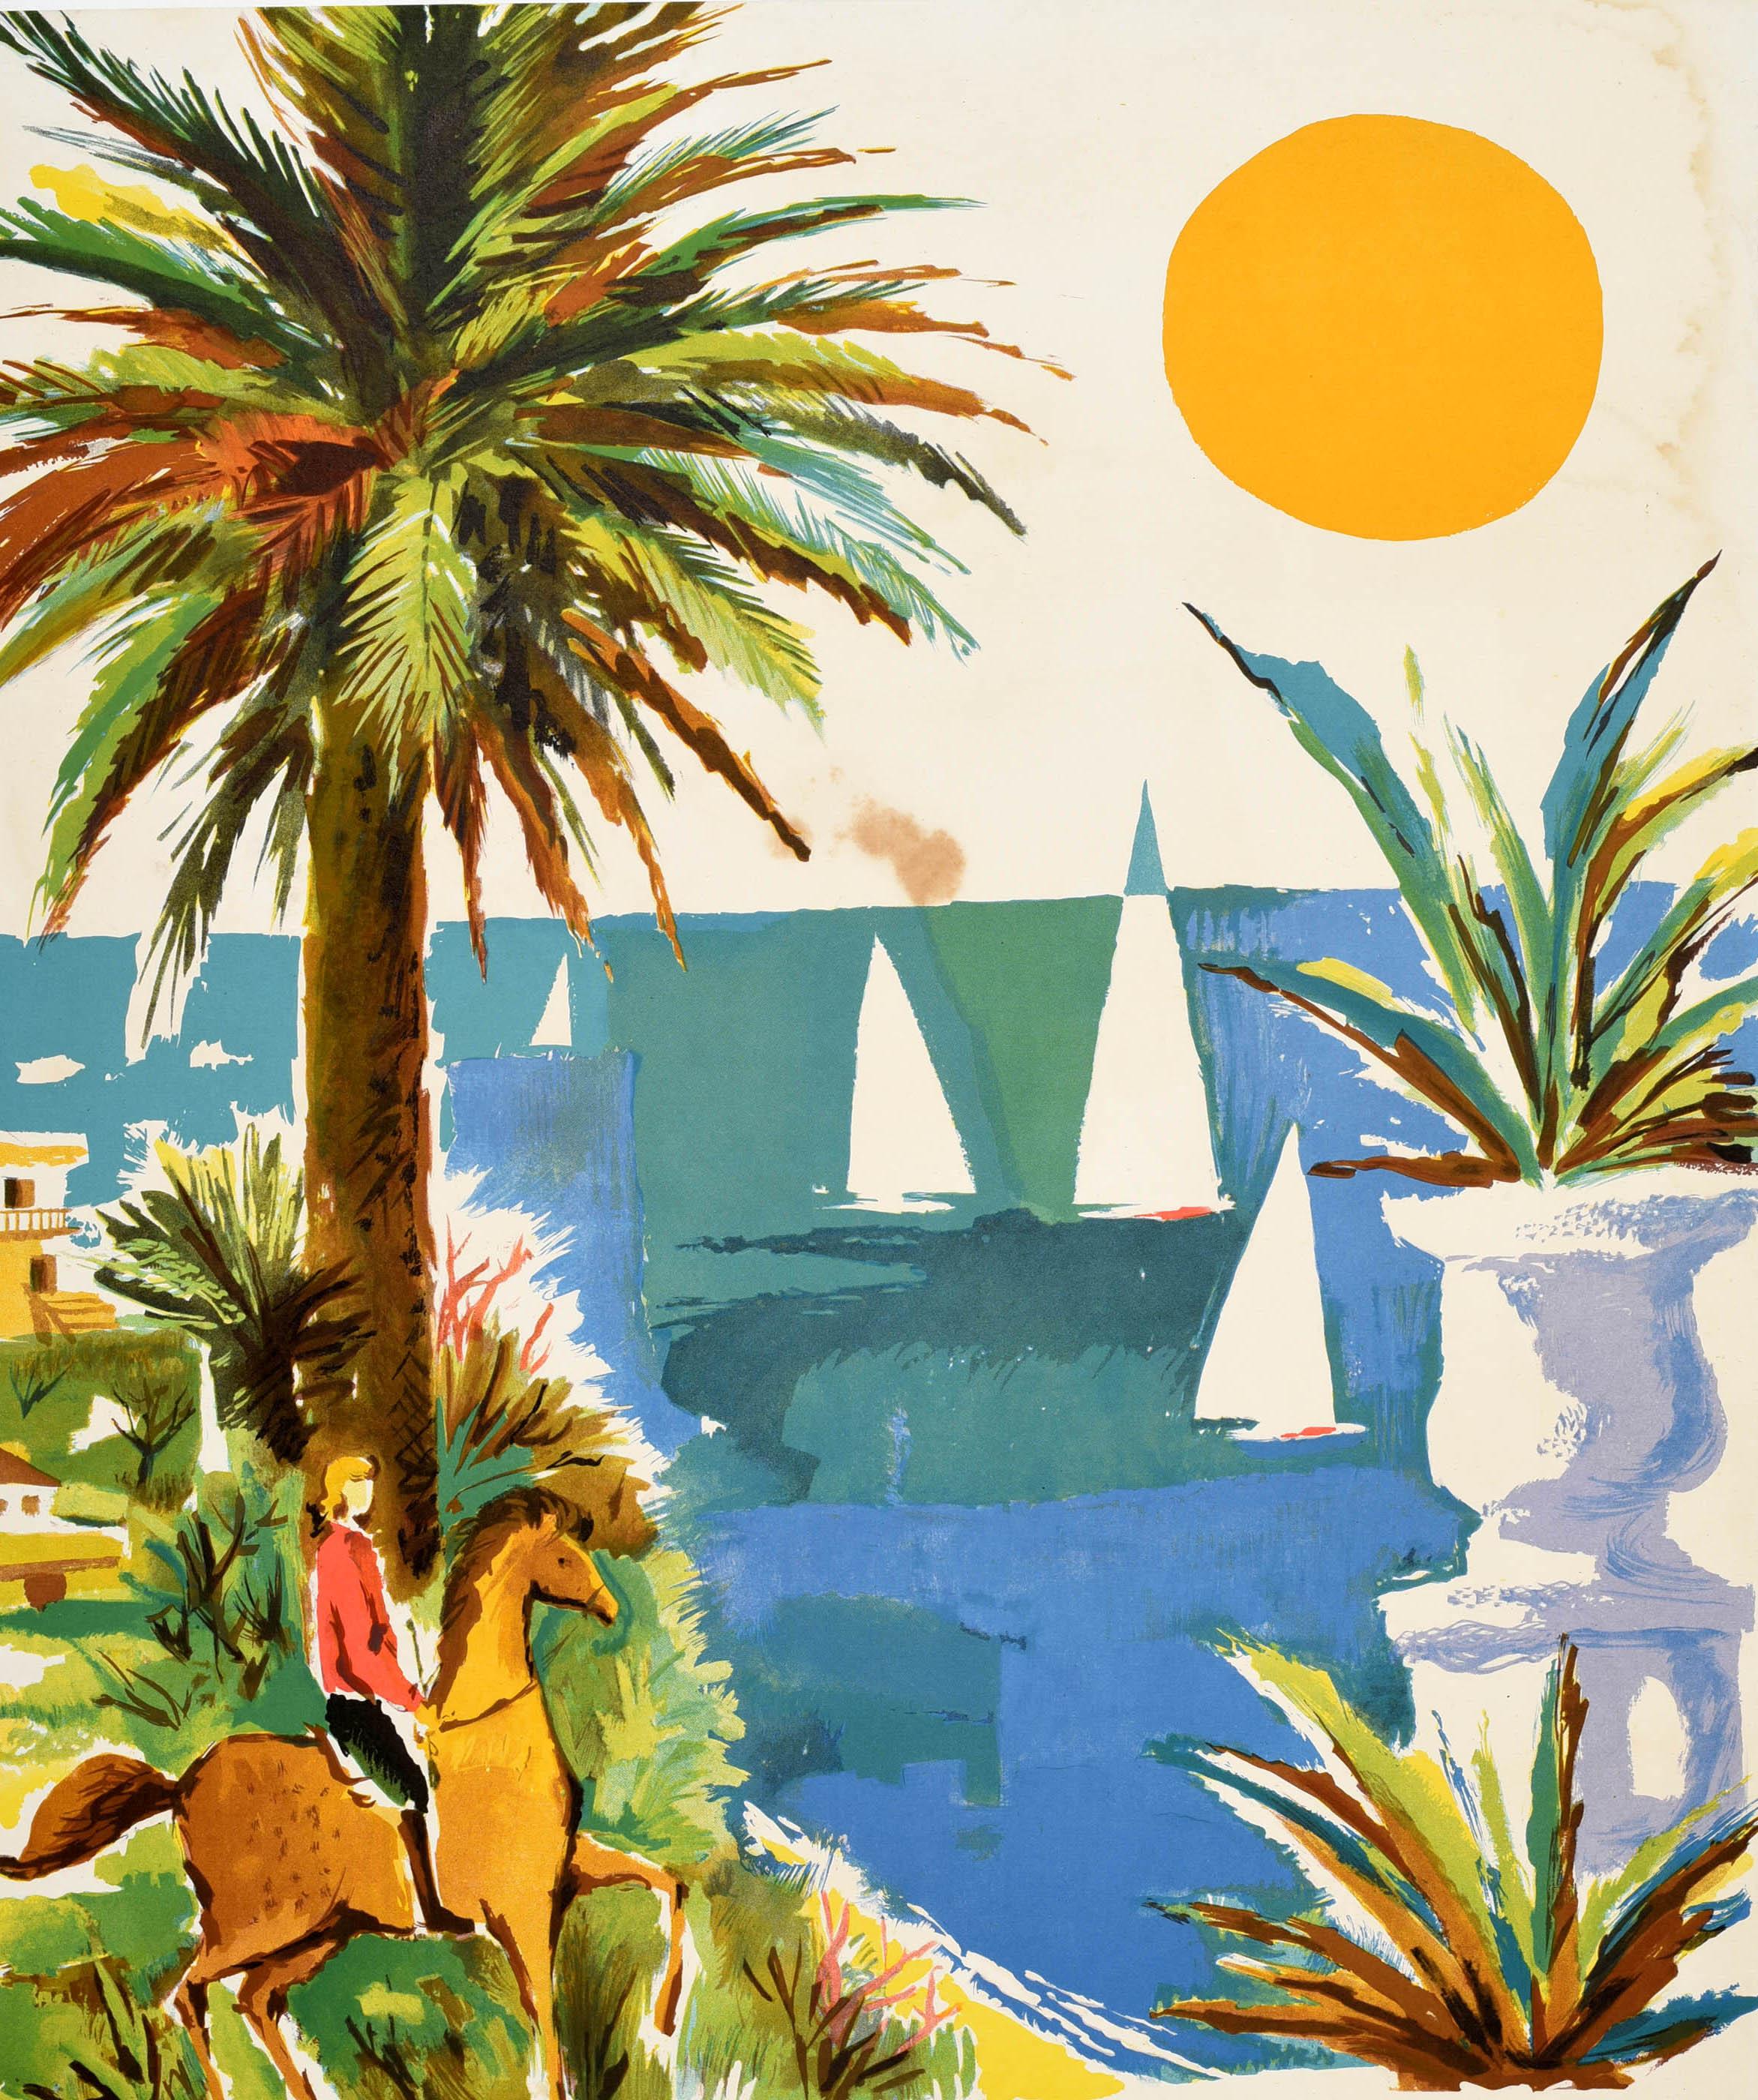 Original Vintage Travel Poster Estoril Portugal Holidays In The Sun Beach Design - Print by Unknown